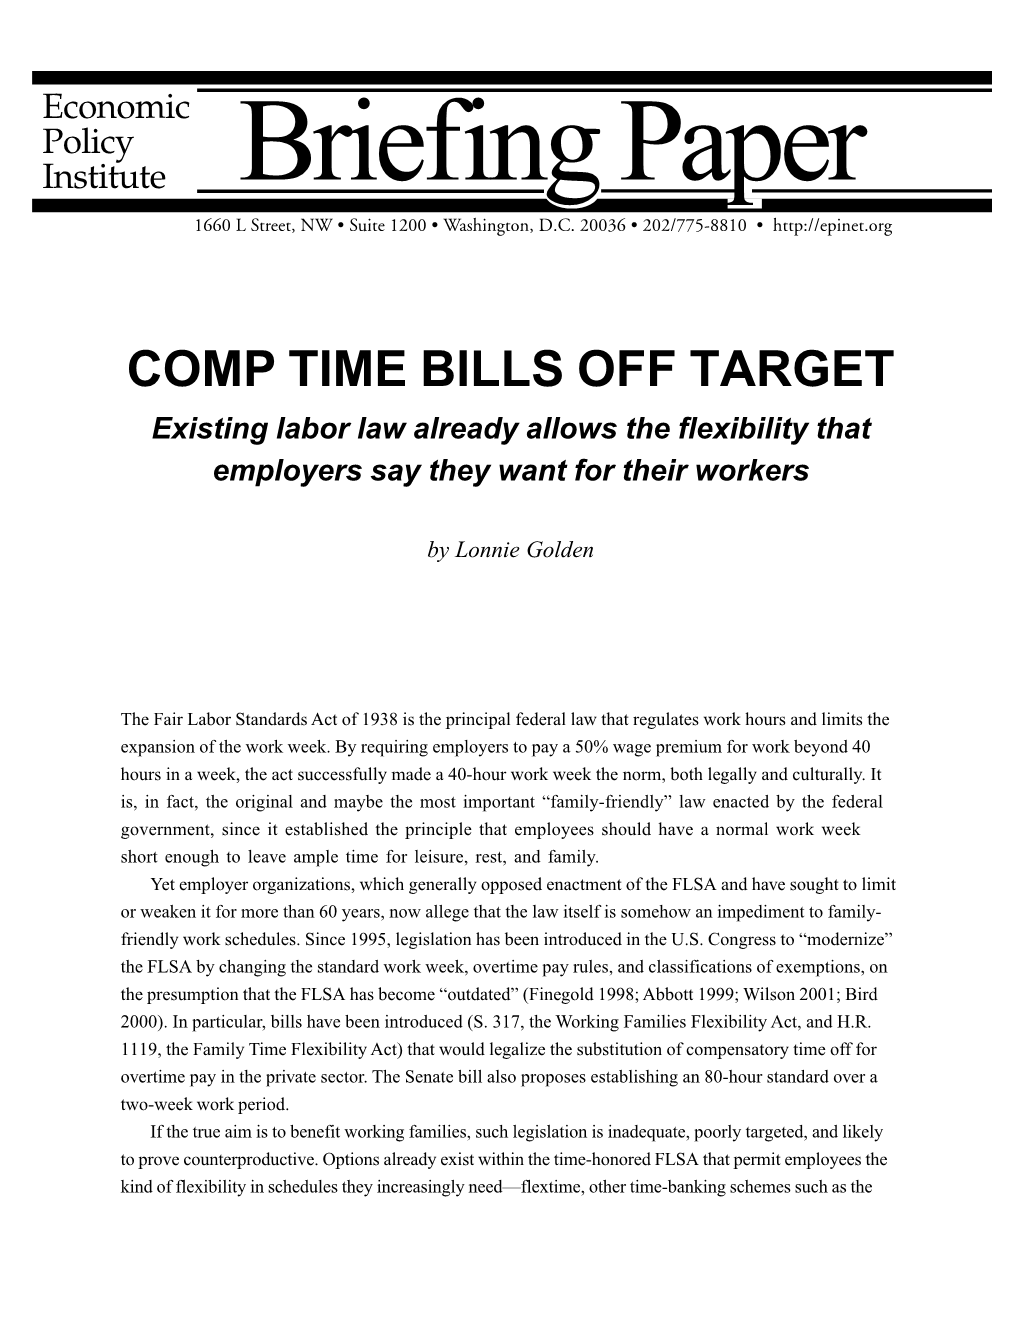 COMP TIME BILLS OFF TARGET Existing Labor Law Already Allows the Flexibility That Employers Say They Want for Their Workers